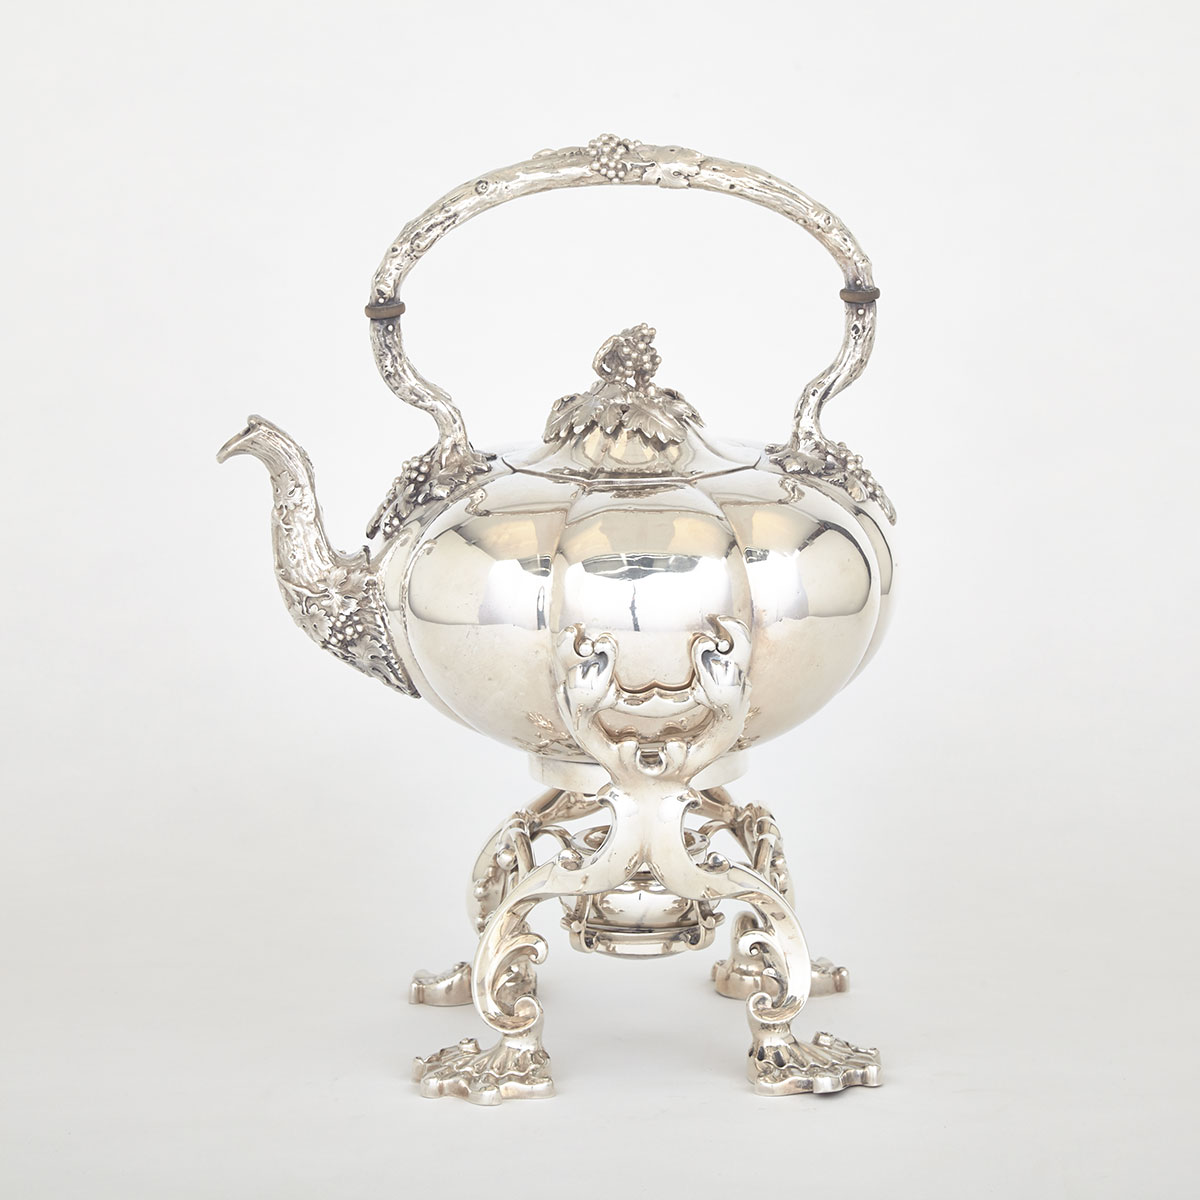 William IV Silver Kettle on Lampstand, Paul Storr, London, 1835